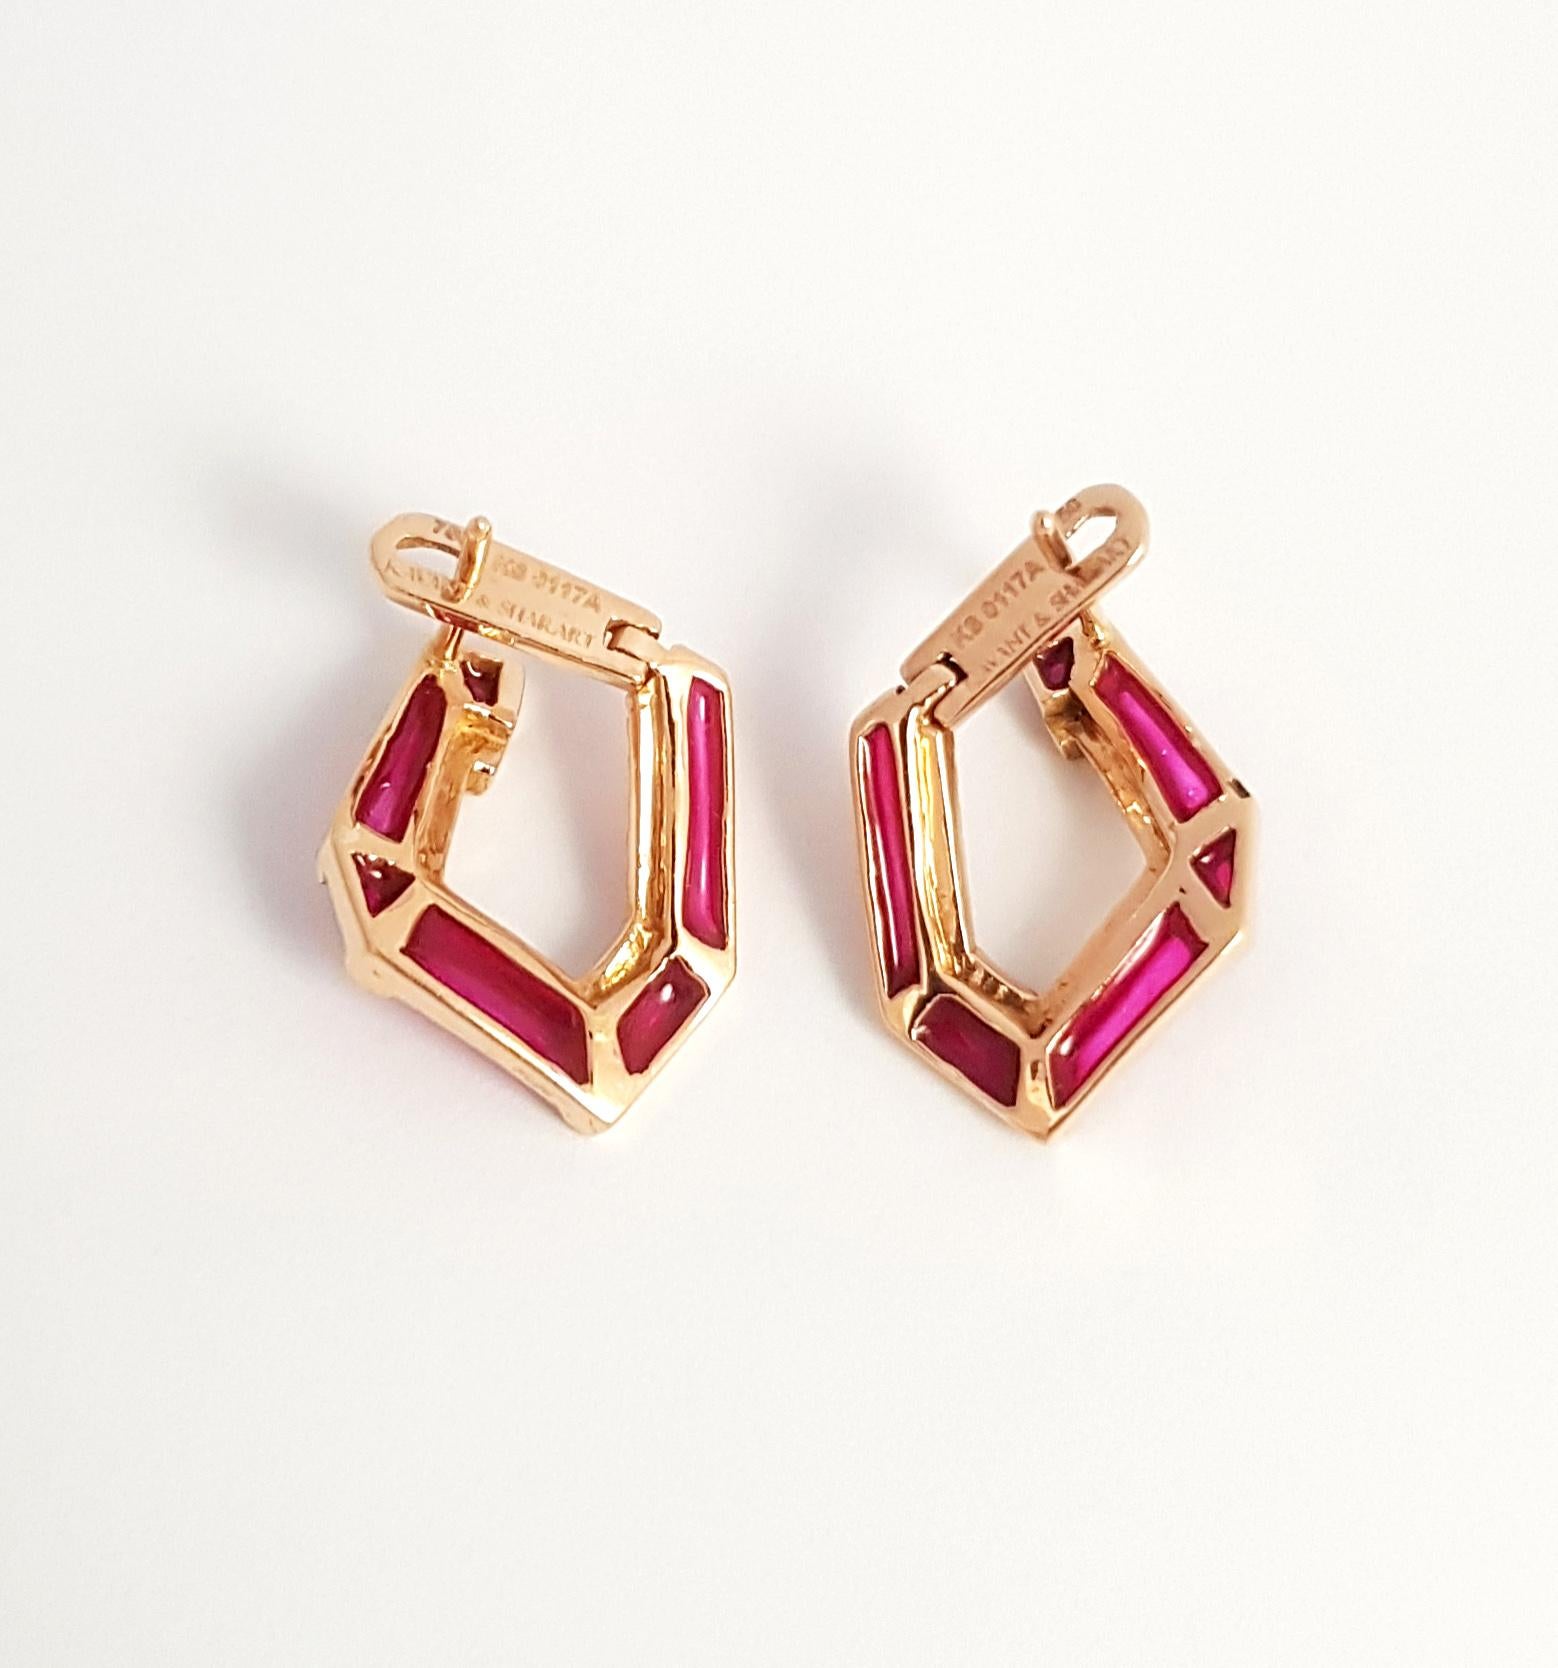 Origami Link No. 5 Ruby with Enamel Earrings 18K Rose Gold Petite For Sale 3